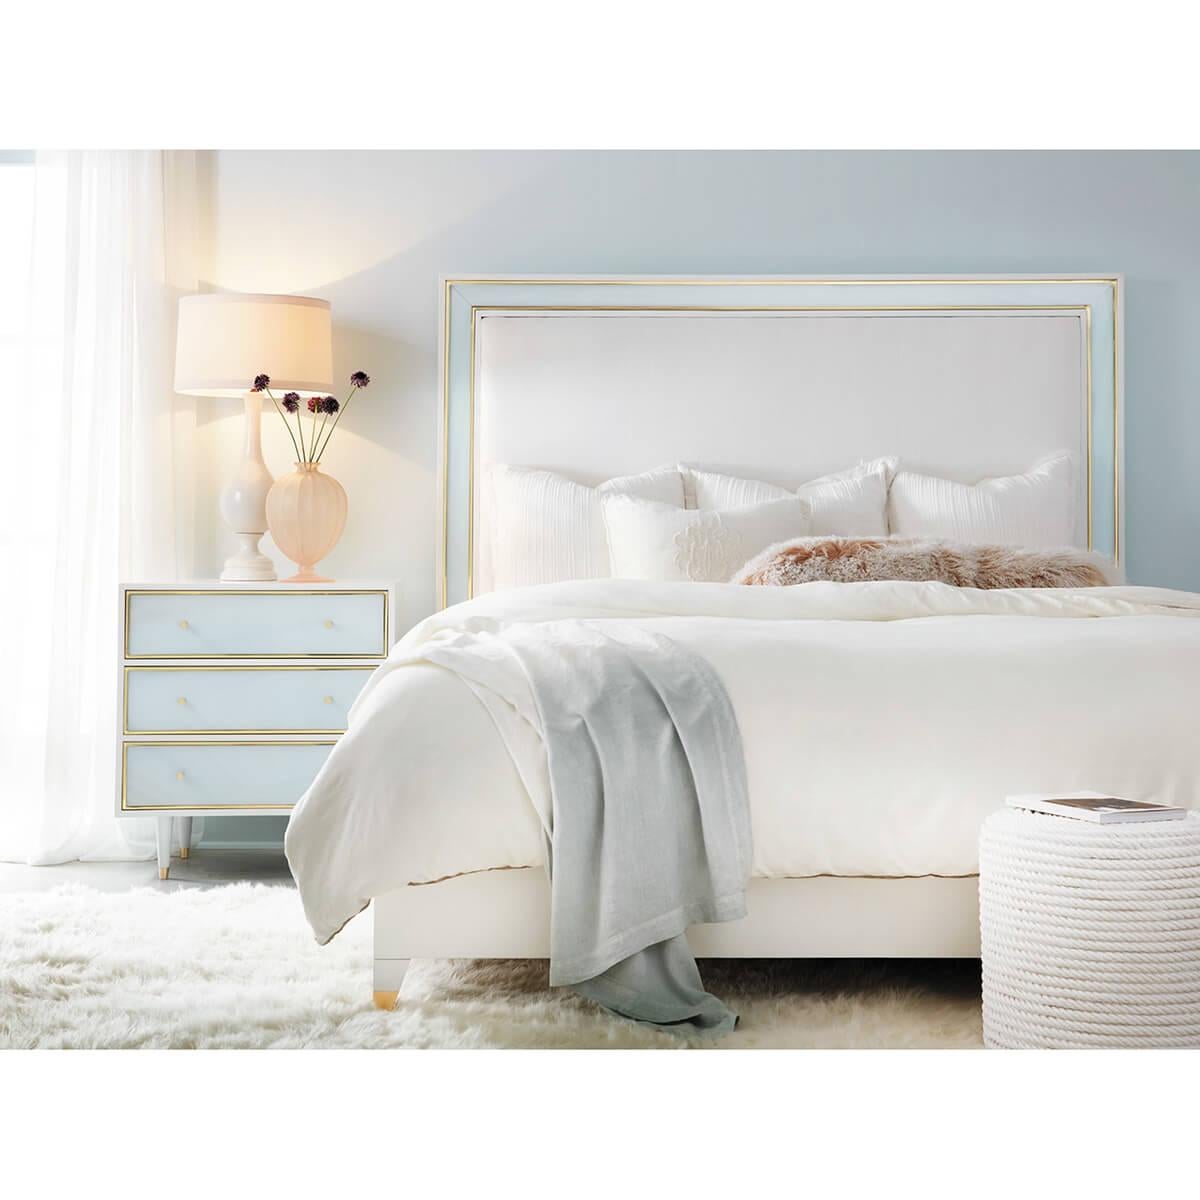 Coastal Sea Glass Bed. The wooden frame is lacquered in brilliant white with the headboard inset with Sea Glass foam color acrylic and framed in brass trim. Raised on tapered legs.

US King Dimensions: 81